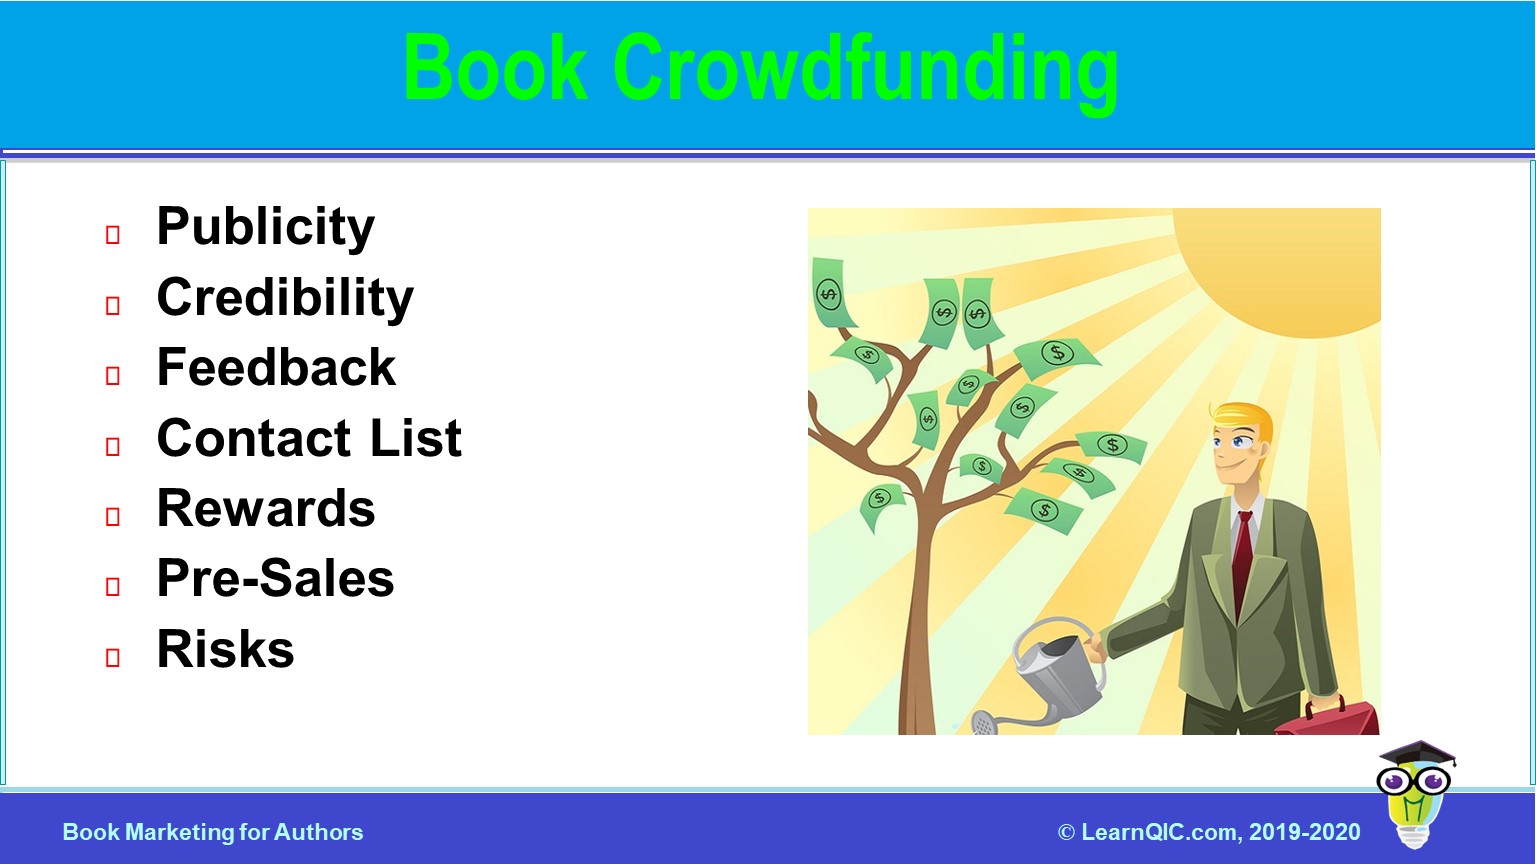 Book Pre-Launch Marketing Crowdfunding Promotion